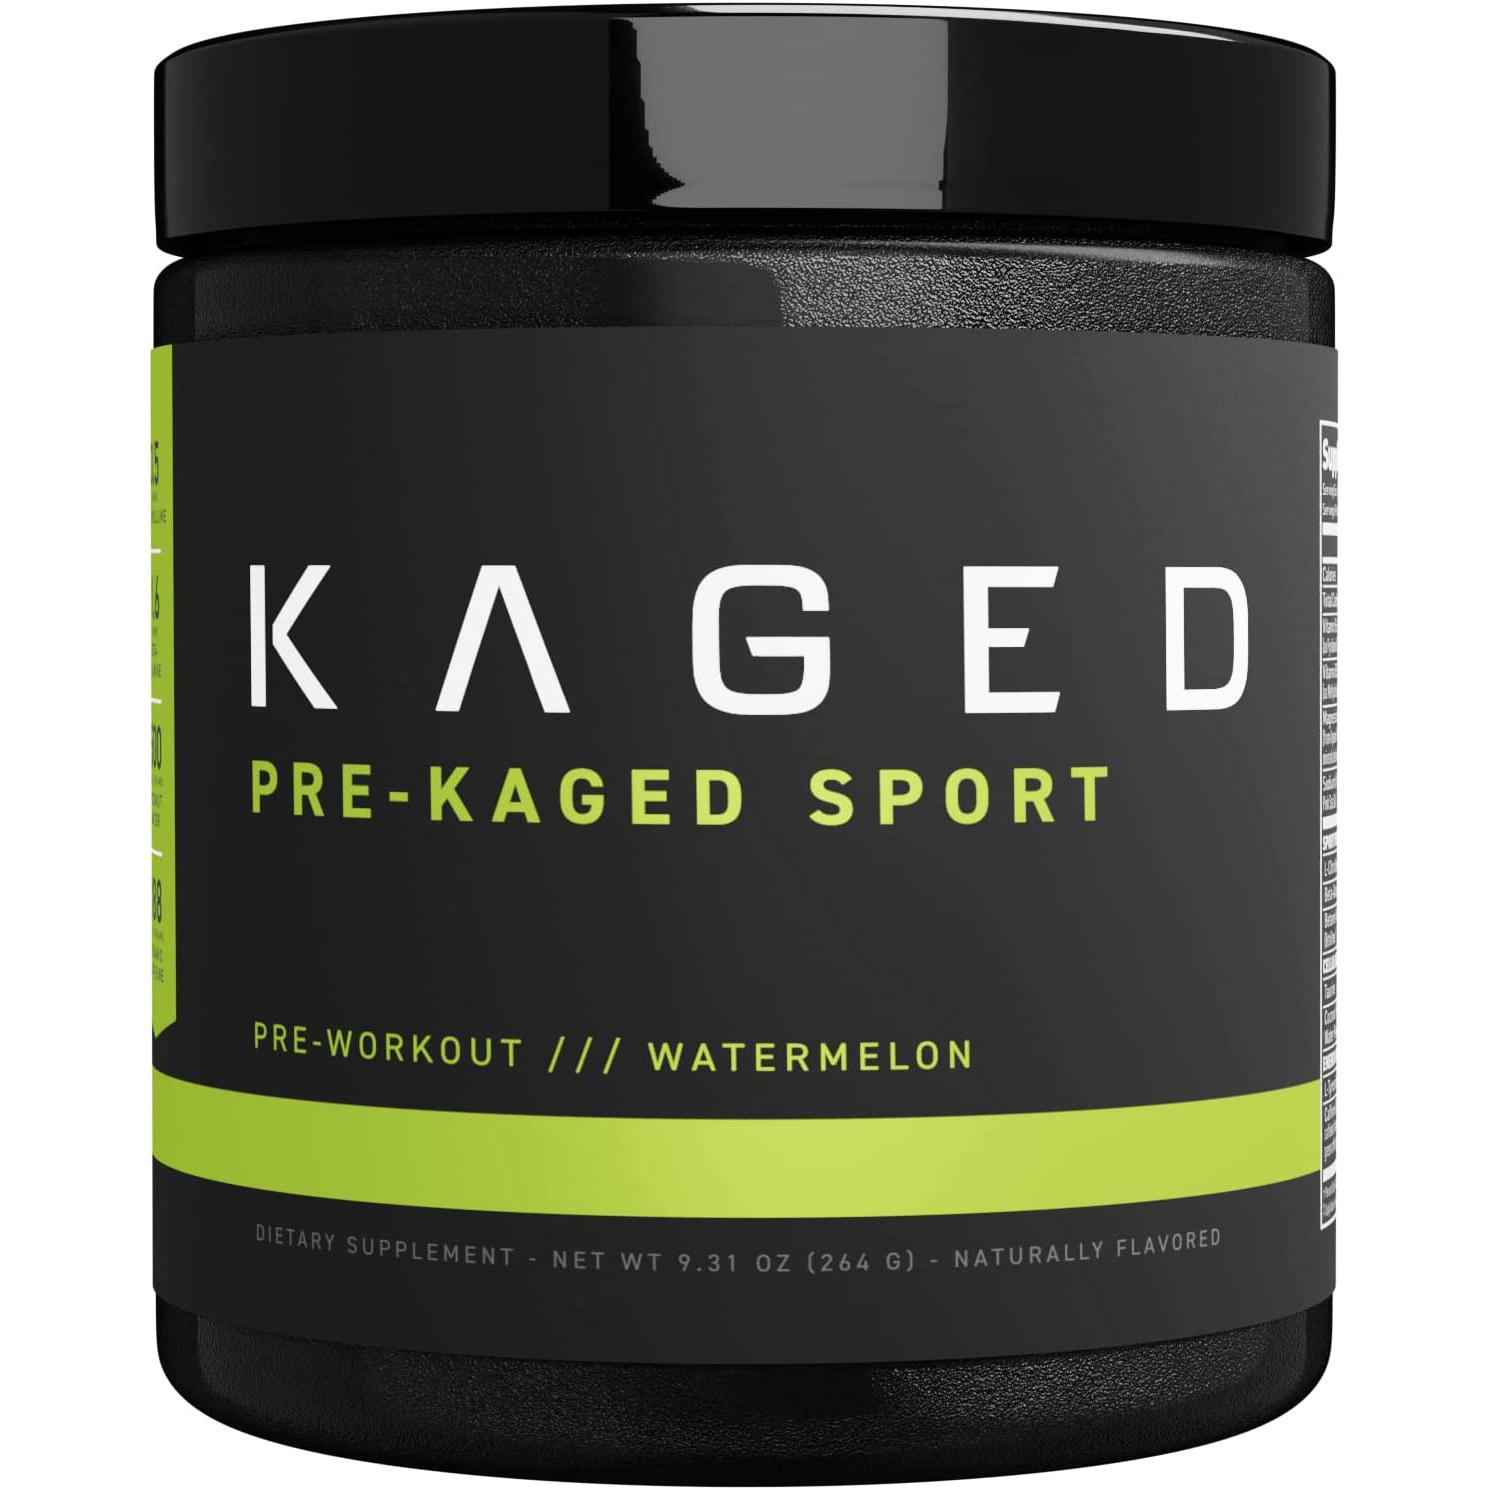 Kaged Pre-Kaged Sport Pre-Workout Powder for $13.49 Shipped